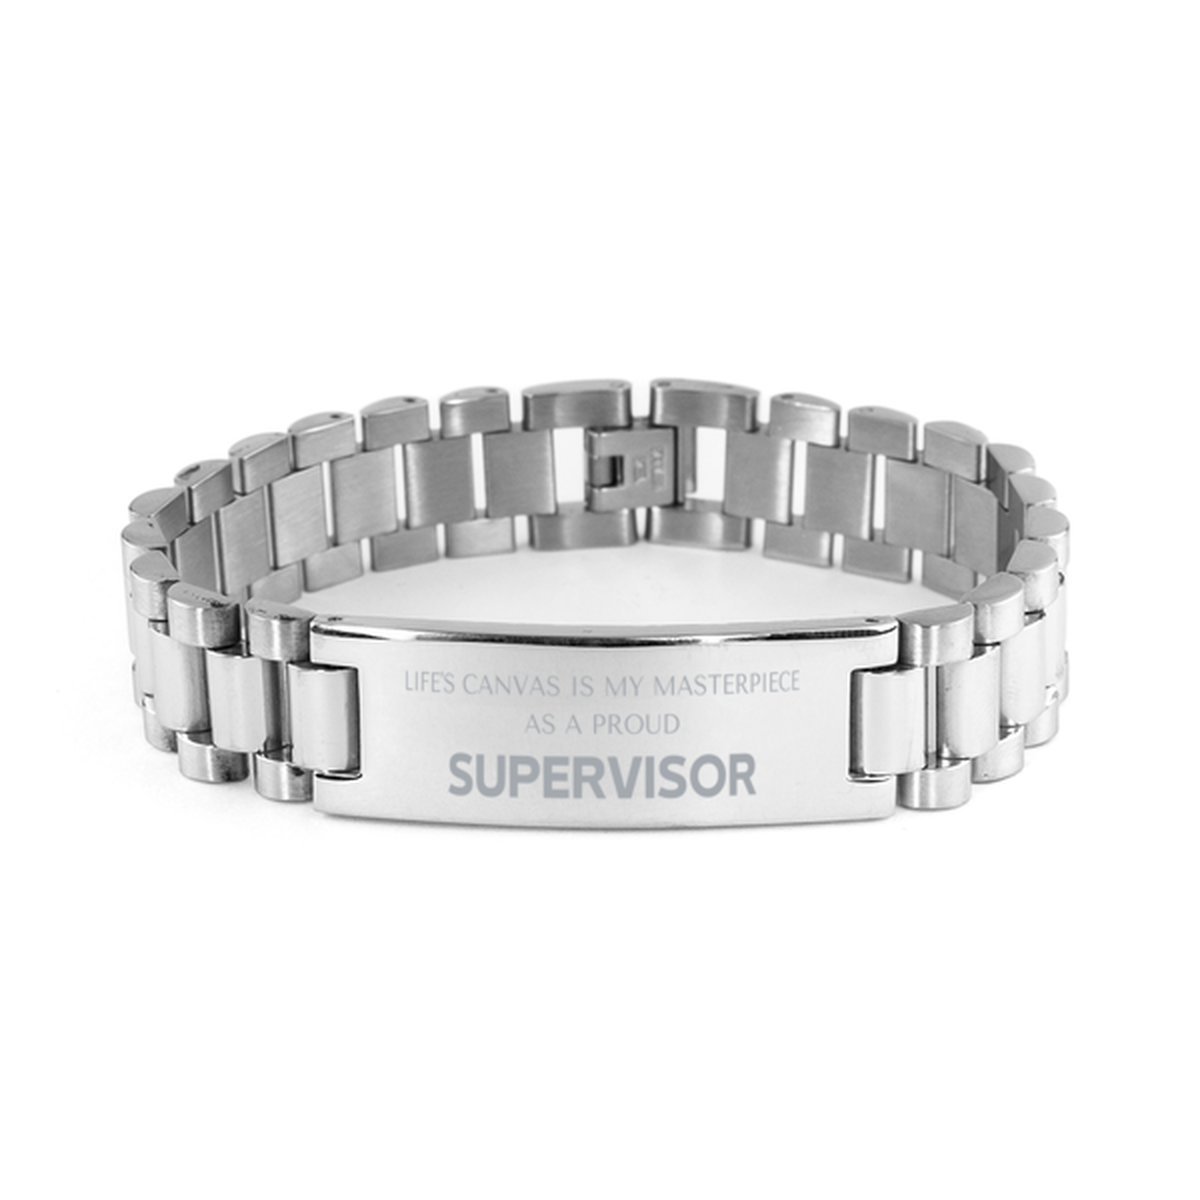 Proud Supervisor Gifts, Life's canvas is my masterpiece, Epic Birthday Christmas Unique Ladder Stainless Steel Bracelet For Supervisor, Coworkers, Men, Women, Friends